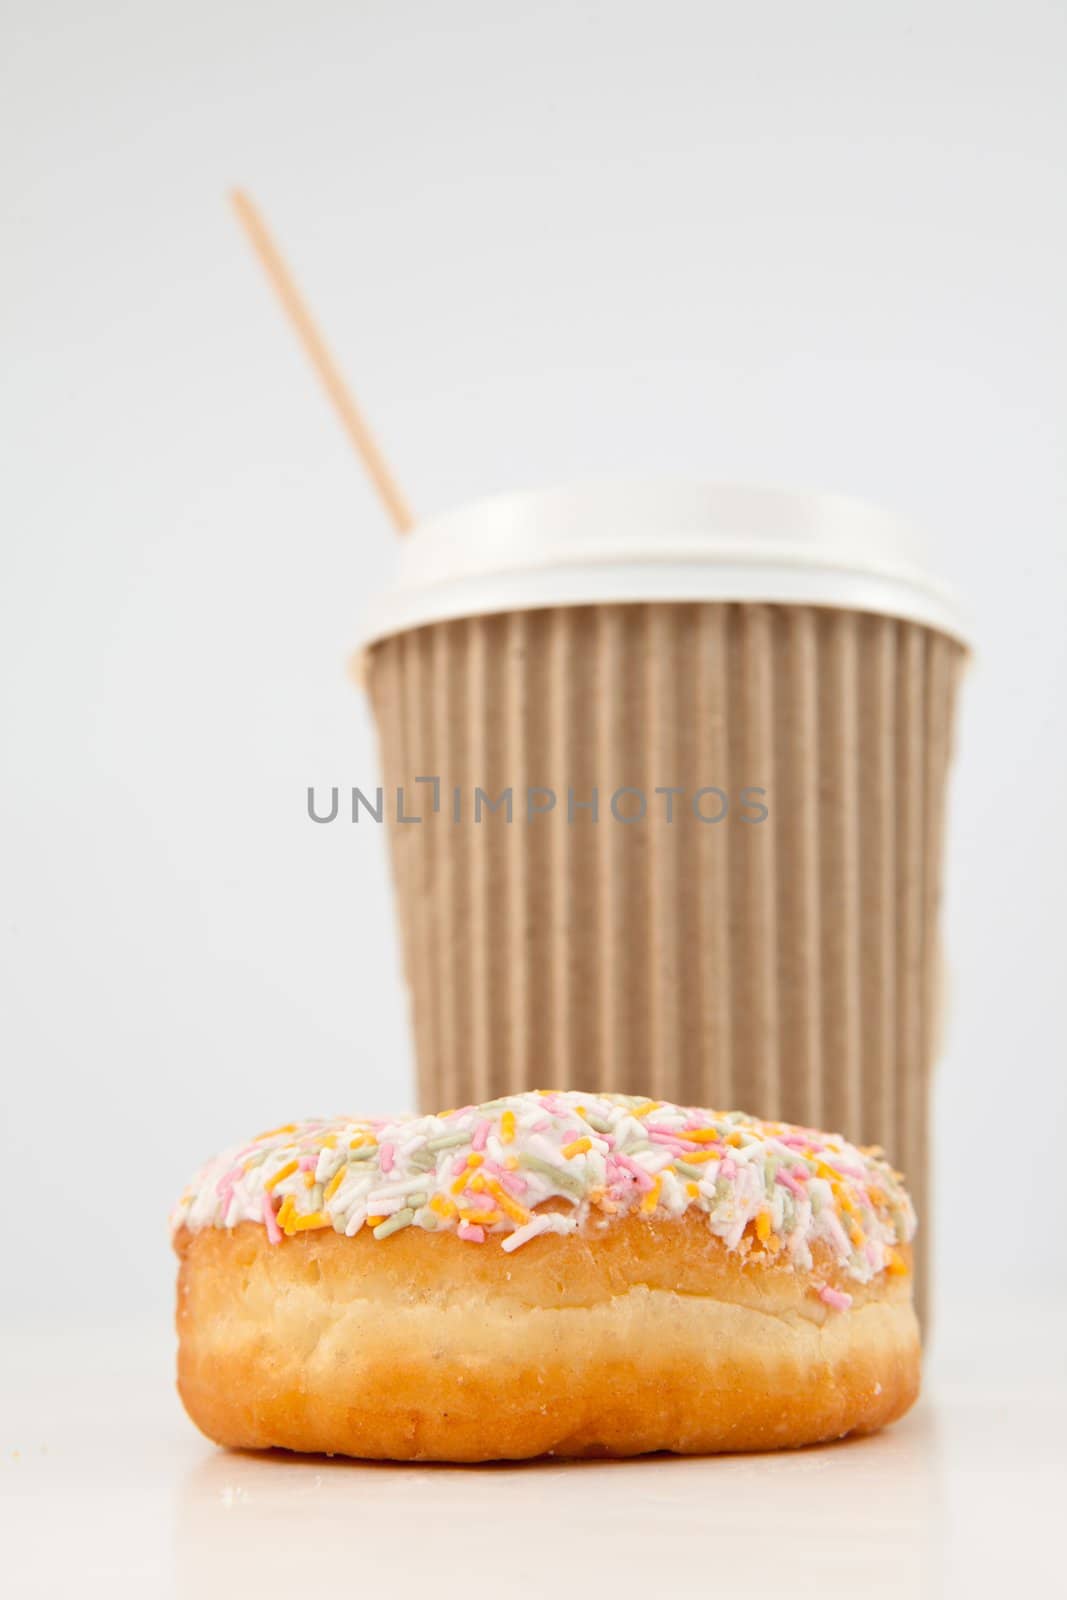 A multi coloured doughnut and a cup of tea placed together against a white background